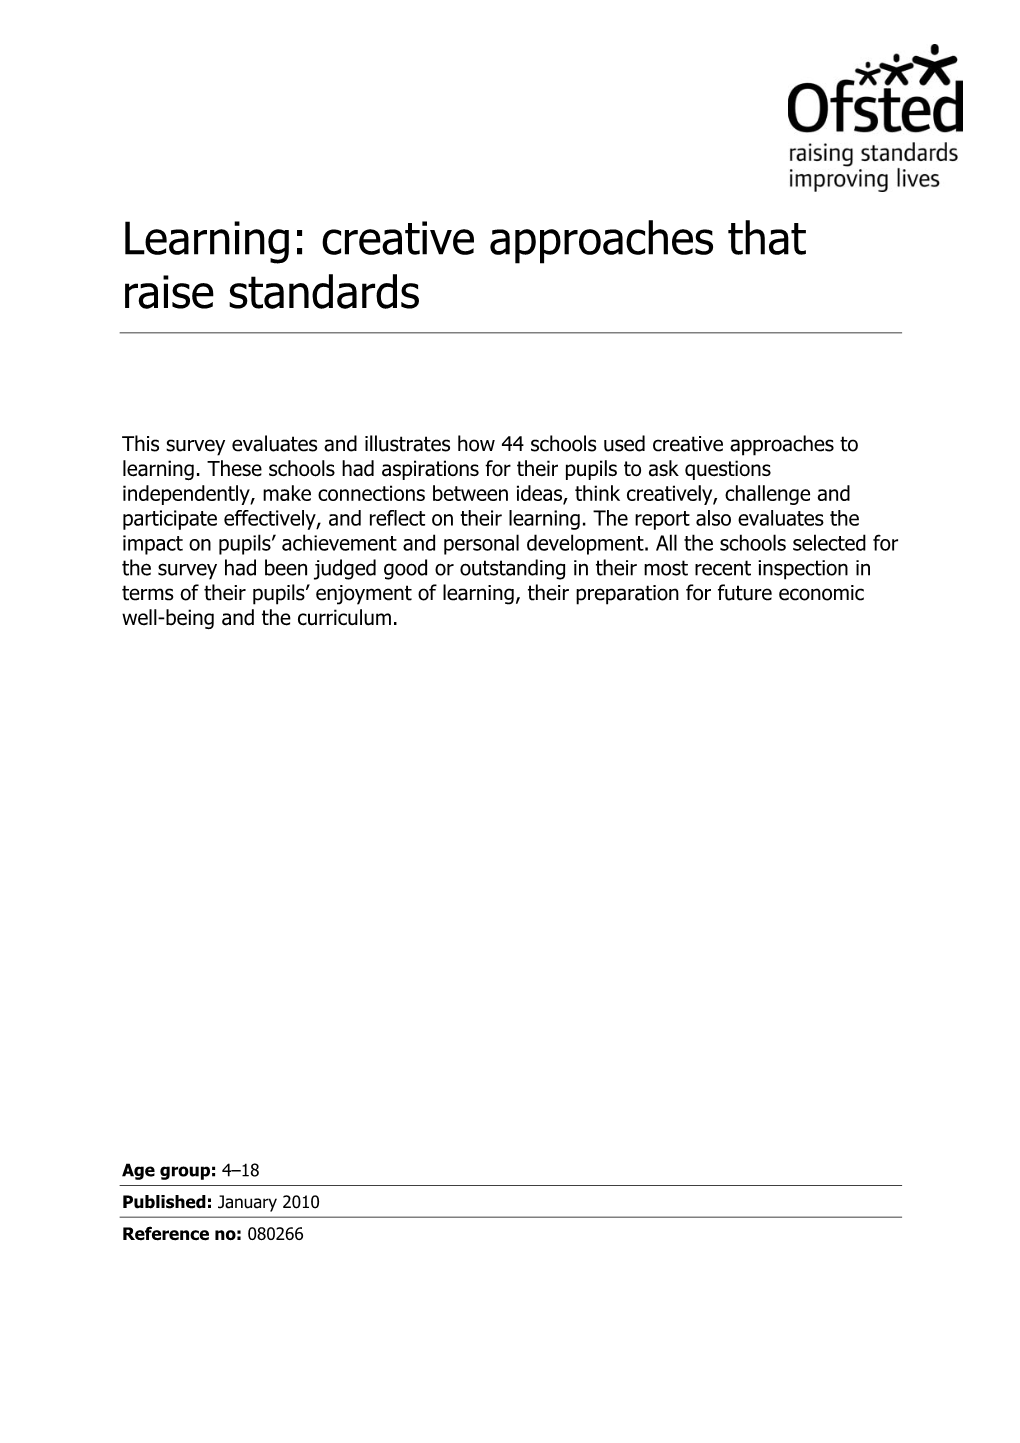 Learning: Creative Approaches That Raise Standards